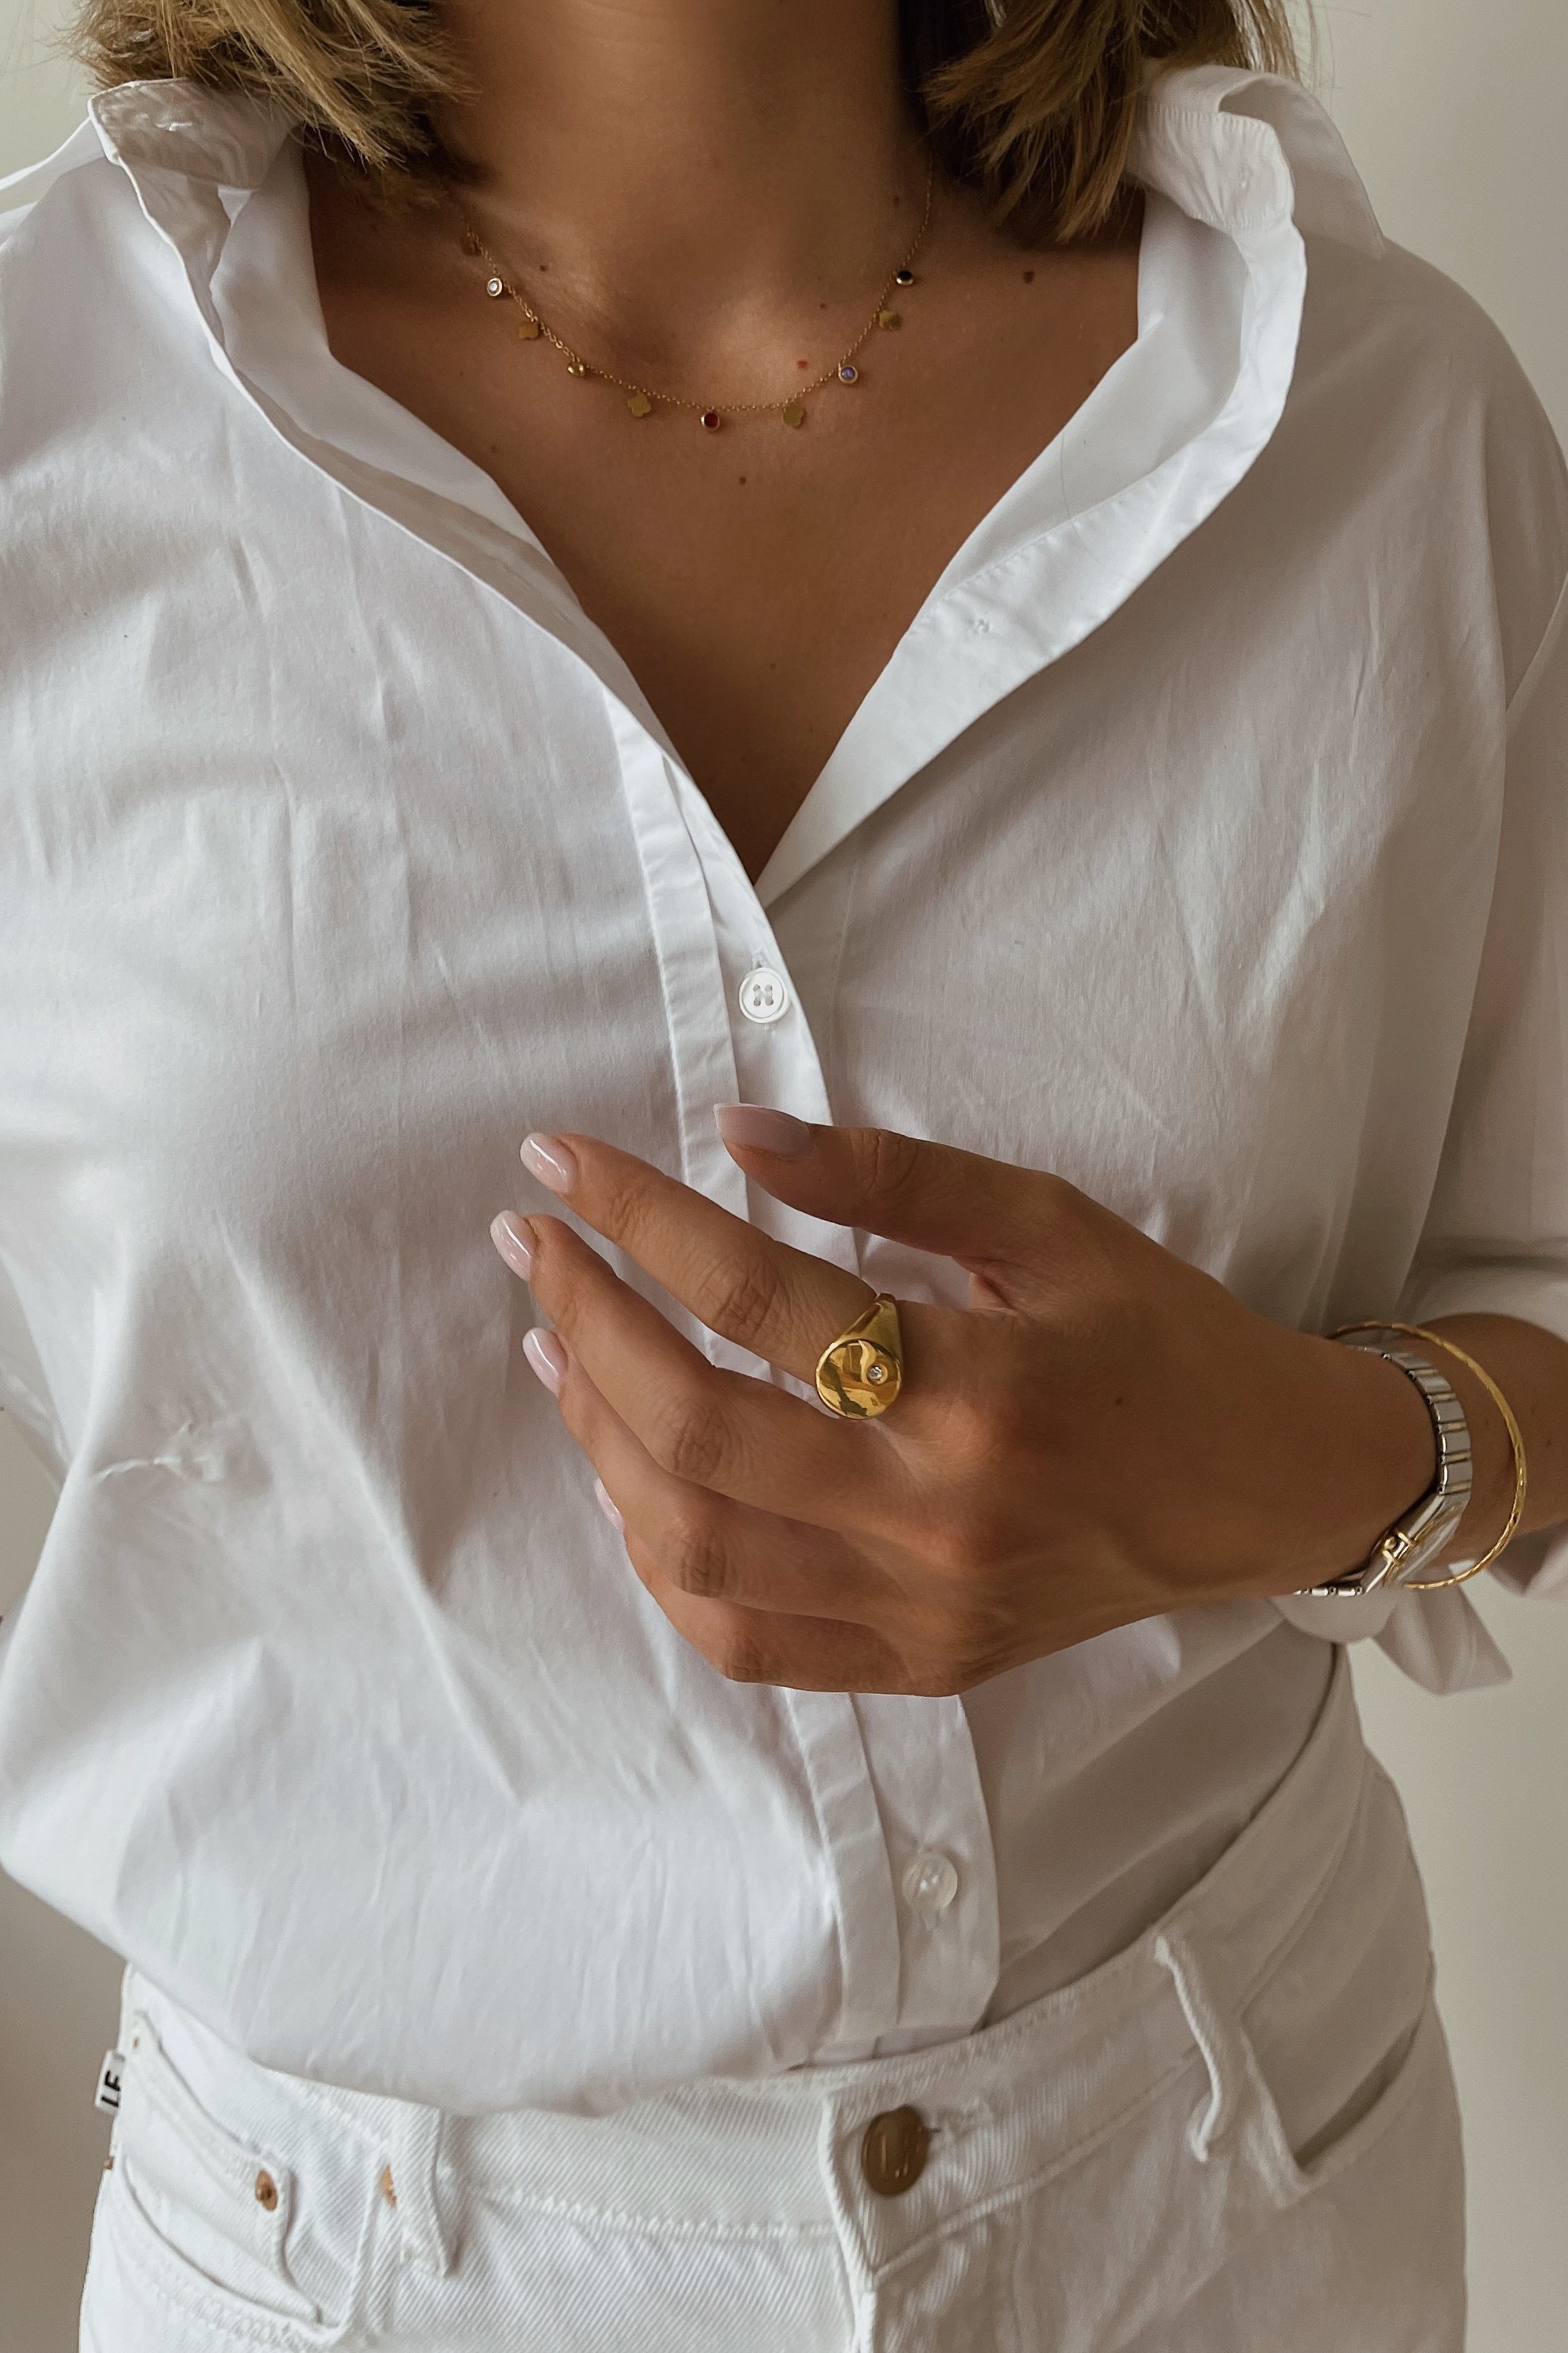 Noa Ring - Boutique Minimaliste has waterproof, durable, elegant and vintage inspired jewelry